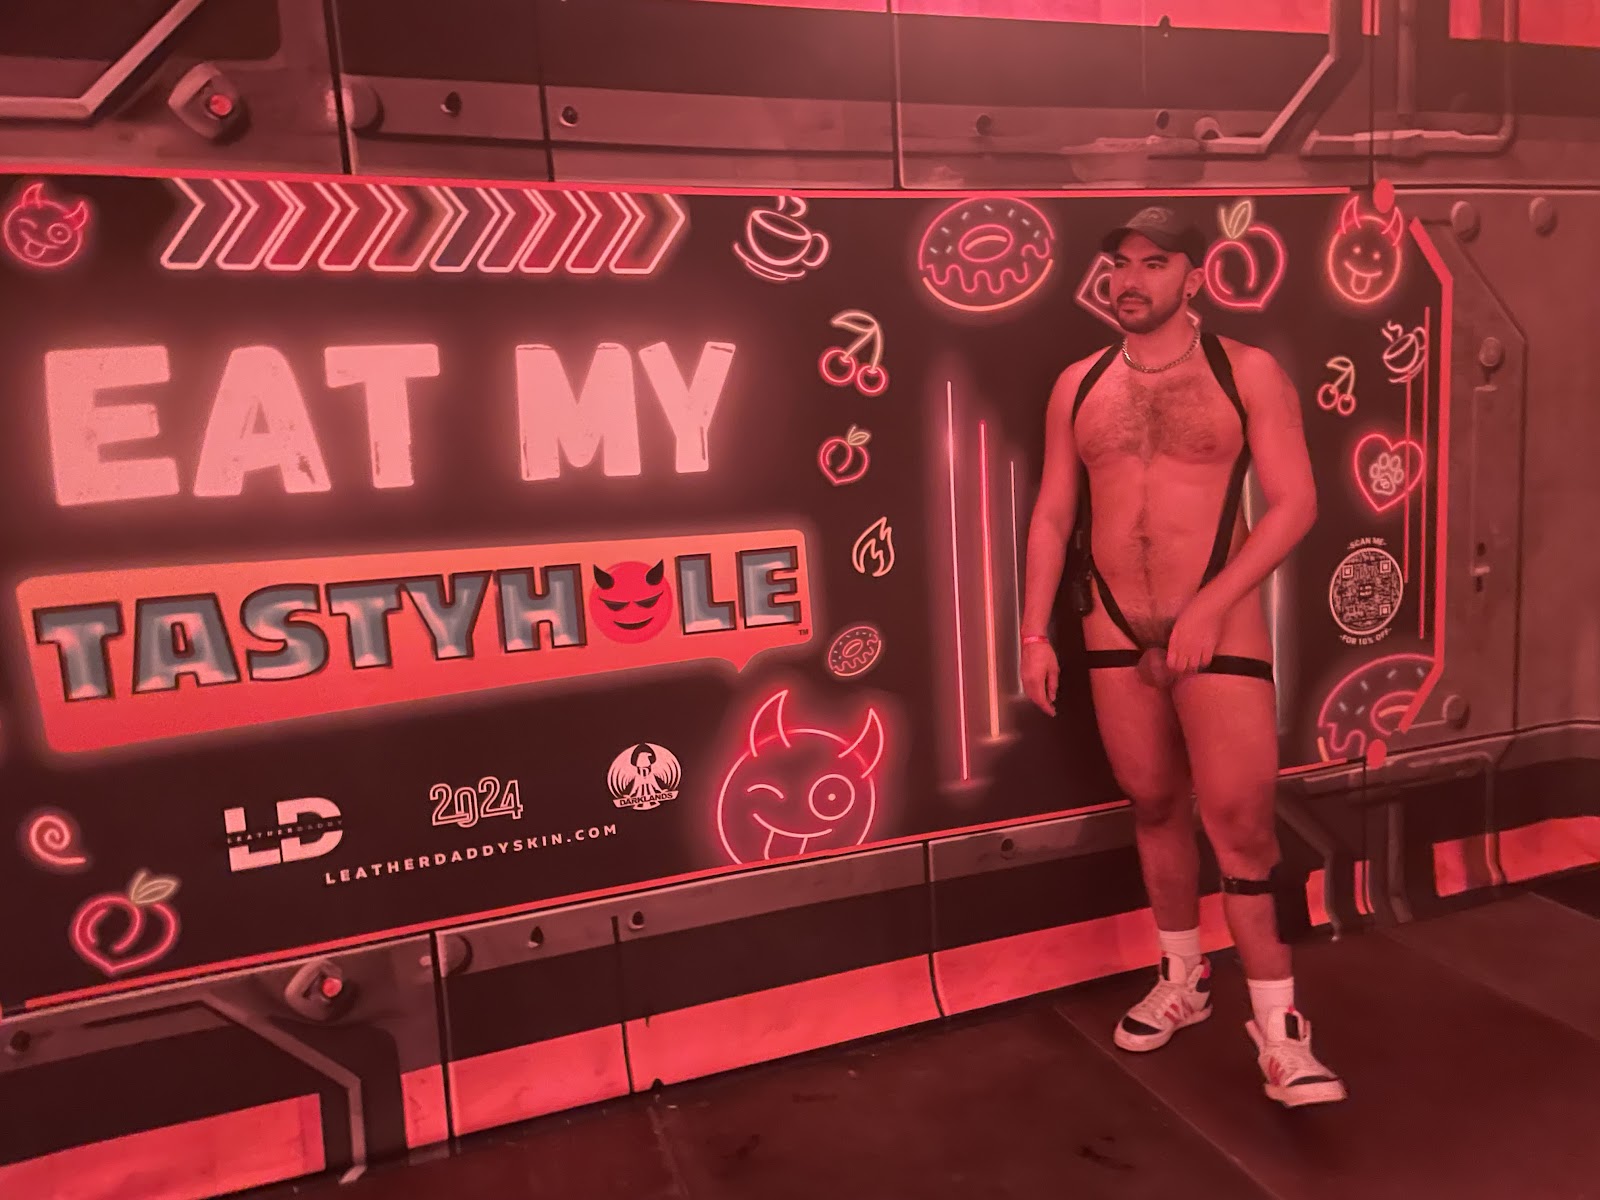 gay onlyfans content creator Phil standing in a gay fetish outfit beside a taste my tastyhole sign in darklands 2024 event party